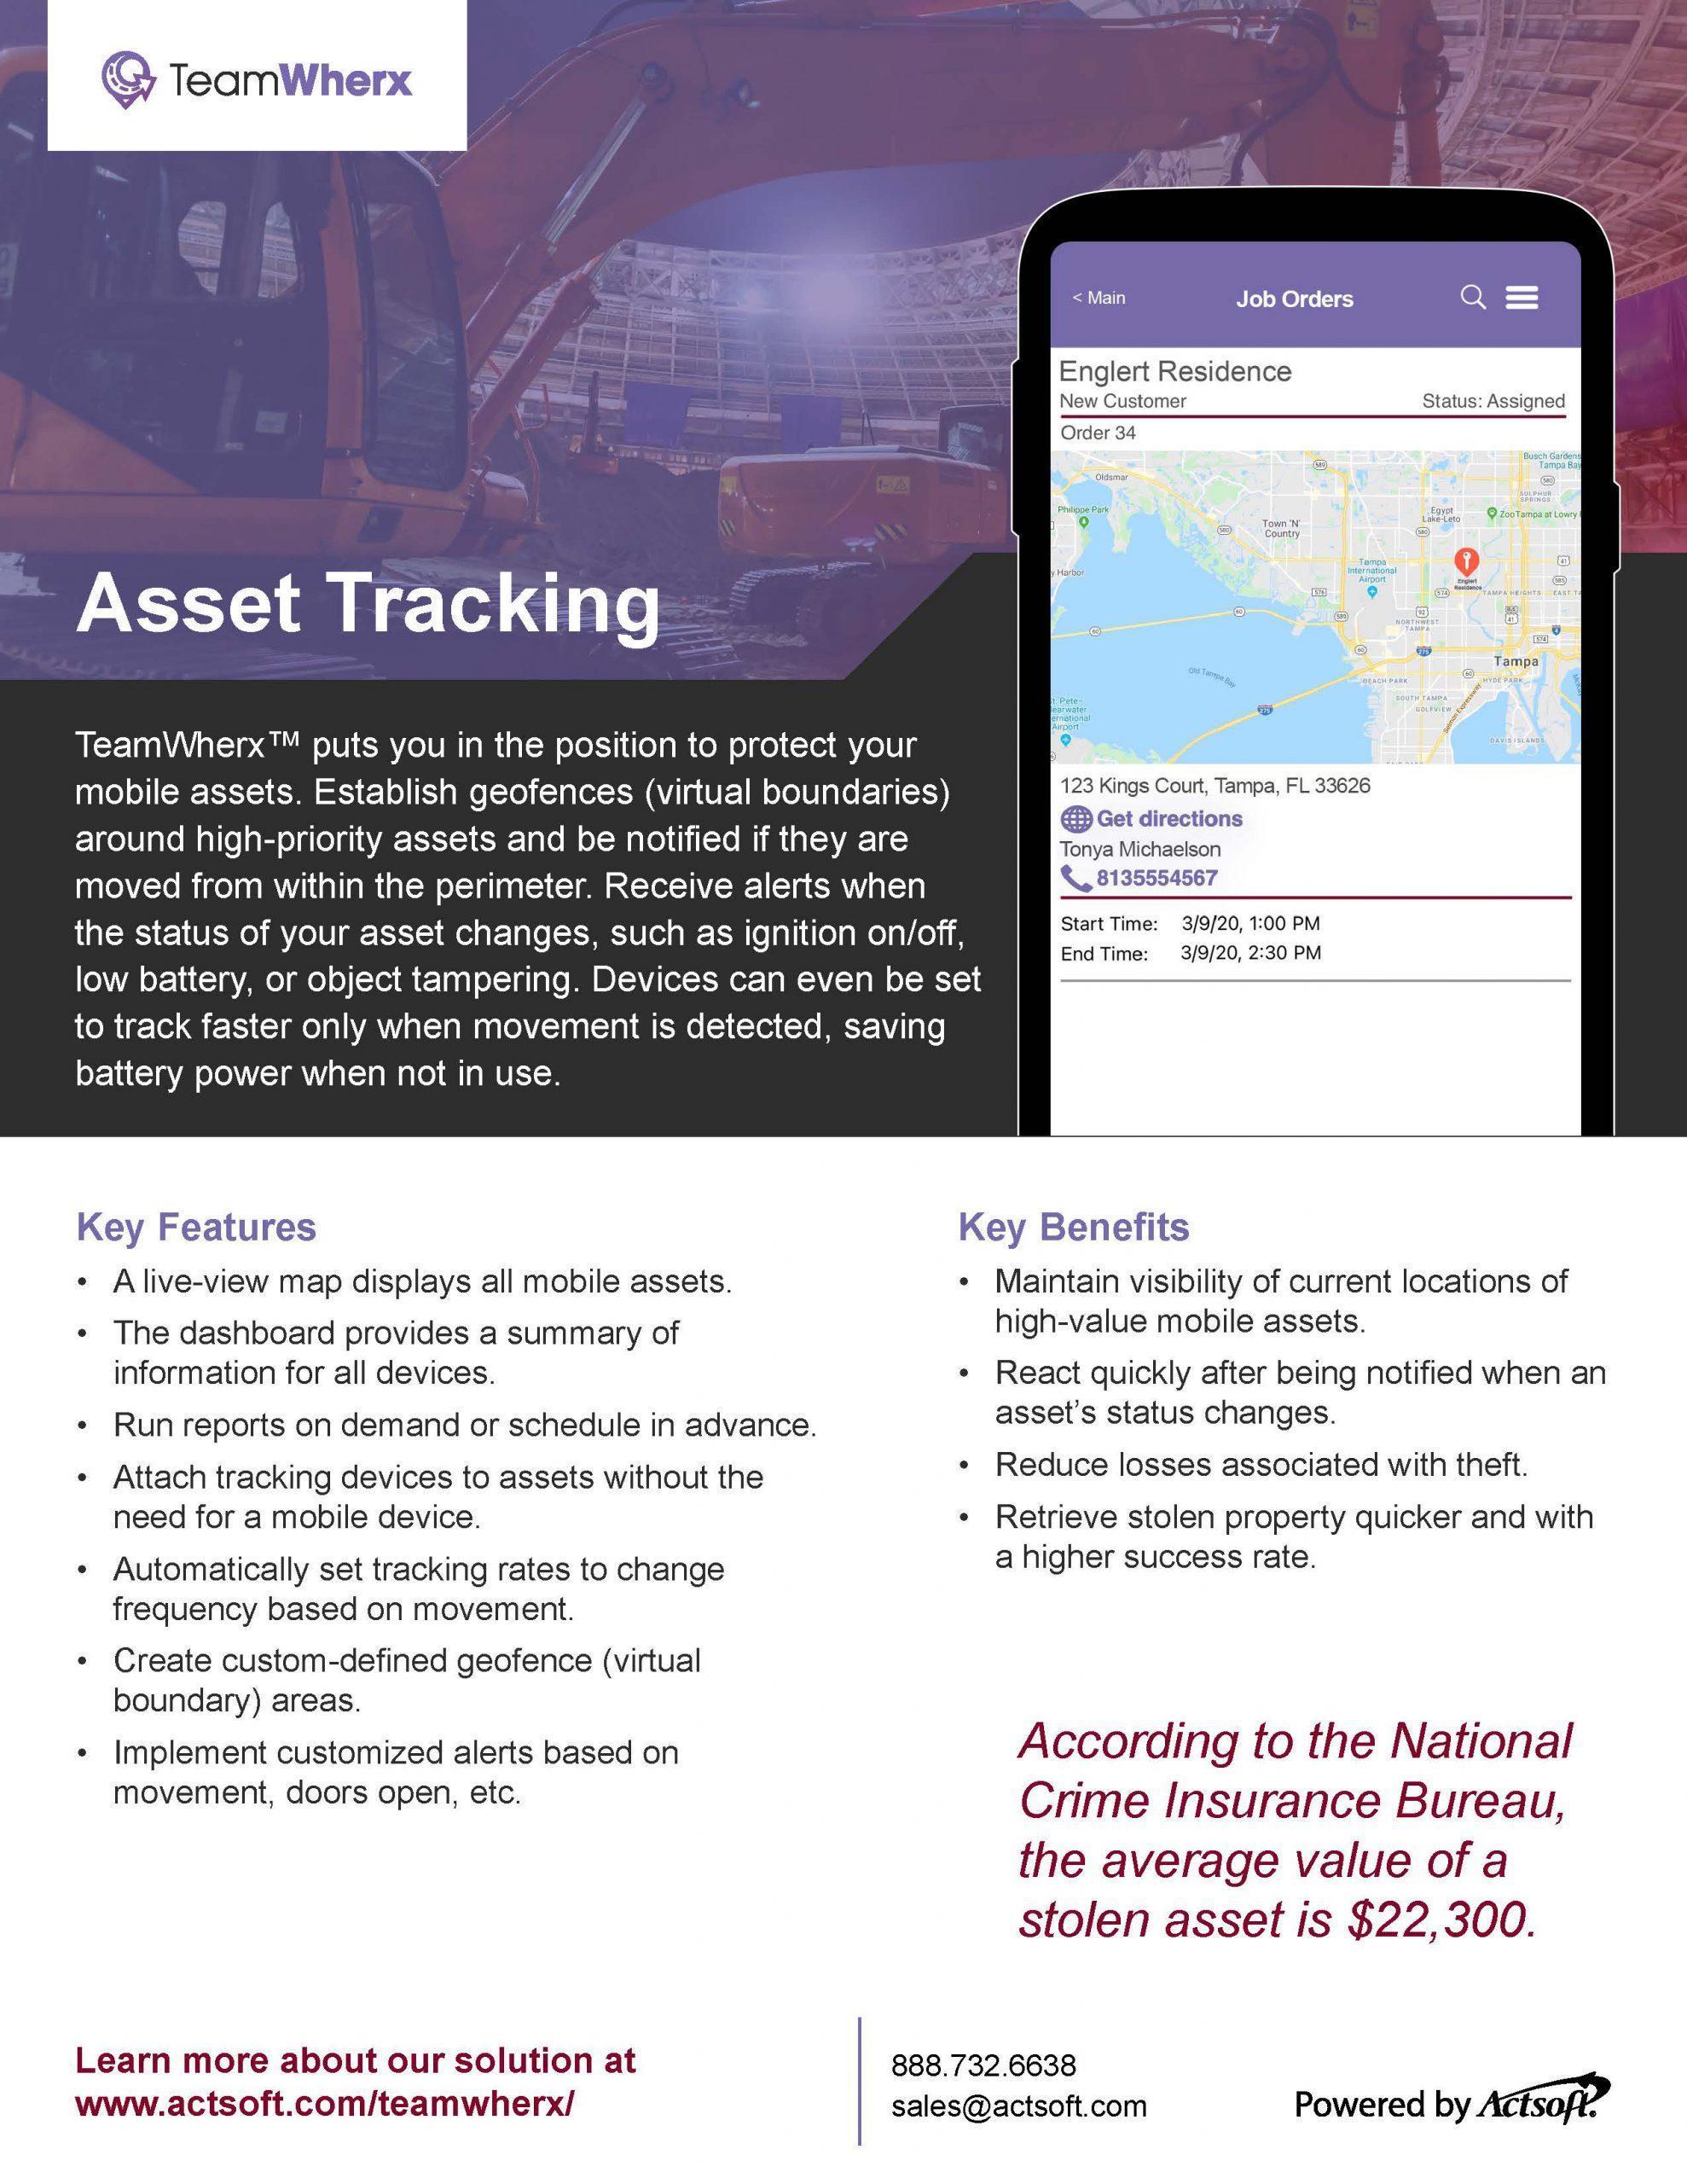 Asset Tracking One-Pager